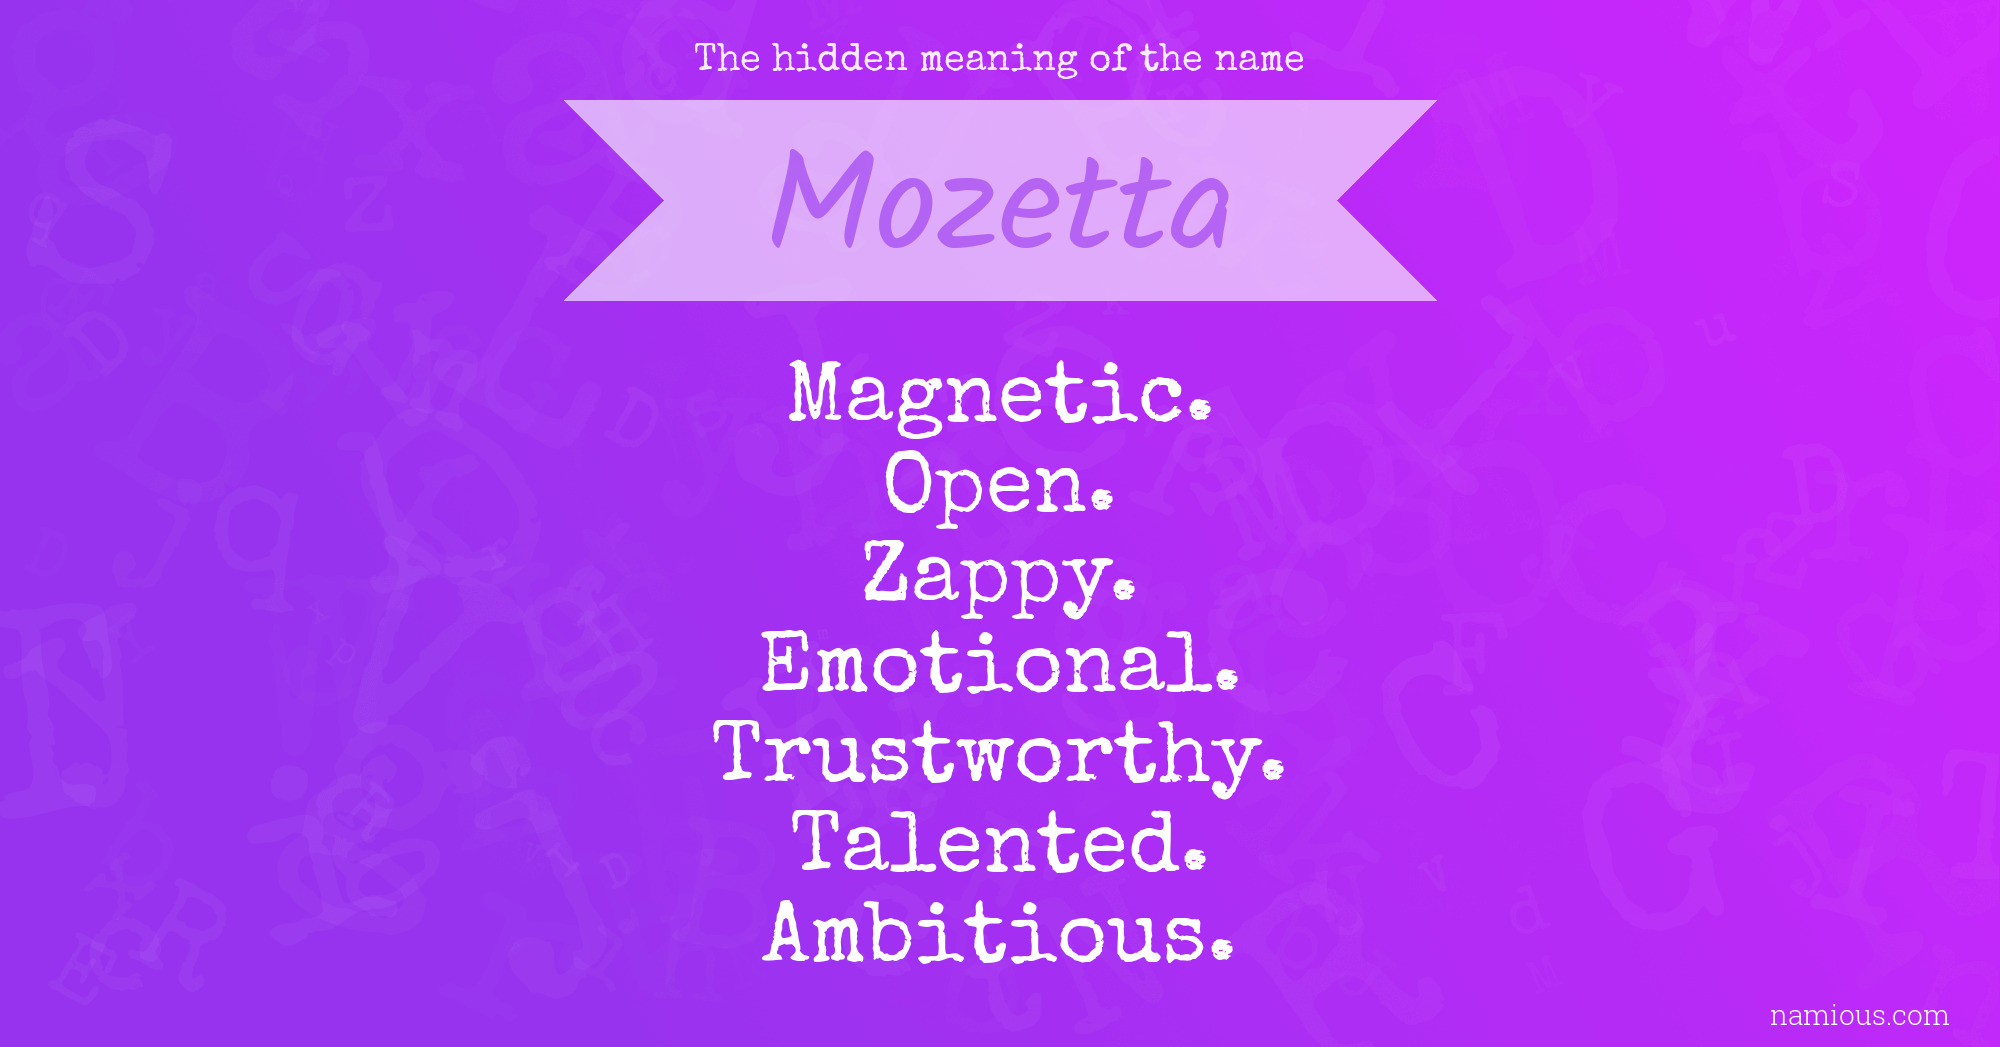 The hidden meaning of the name Mozetta